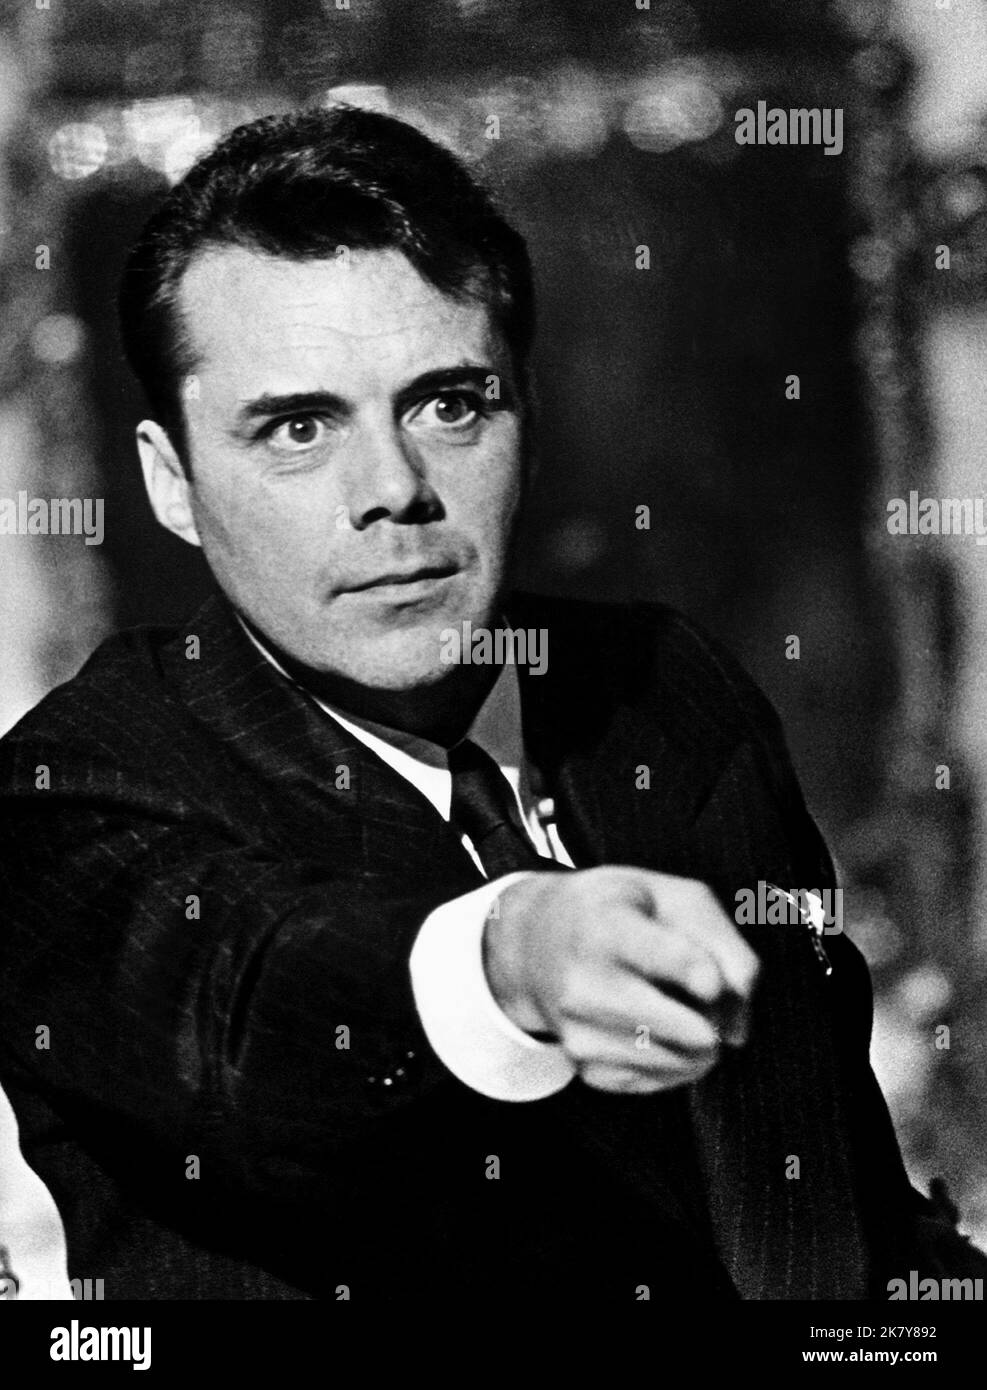 Dirk Bogarde Film: The Damned (1969) Characters: Frederick Bruckmann ...